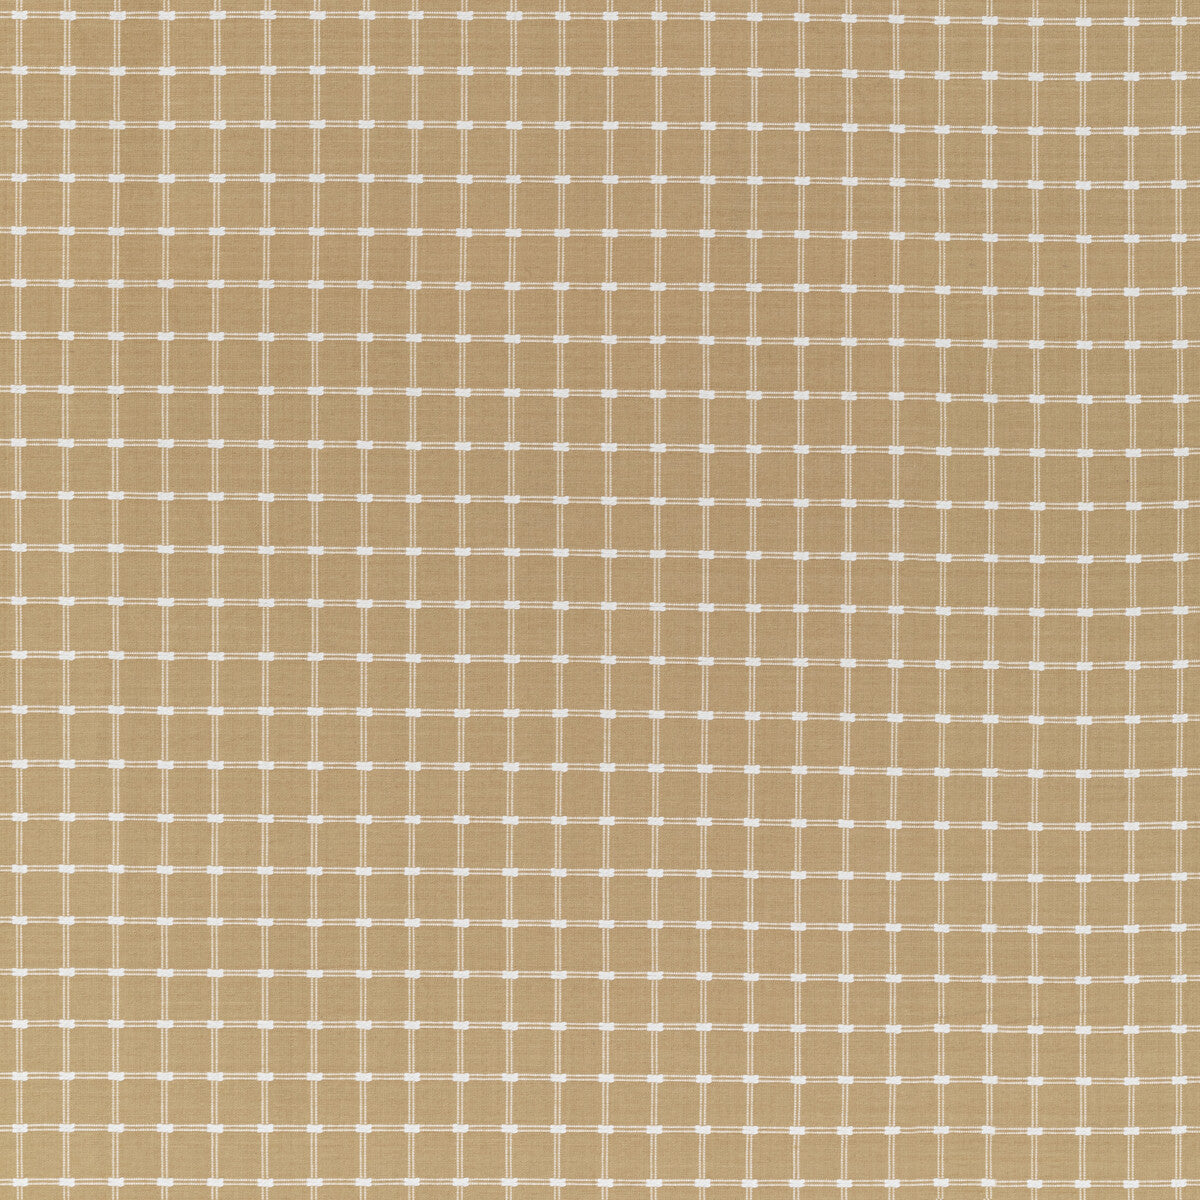 Lison Check fabric in beige color - pattern 8022116.16.0 - by Brunschwig &amp; Fils in the Normant Checks And Stripes II collection